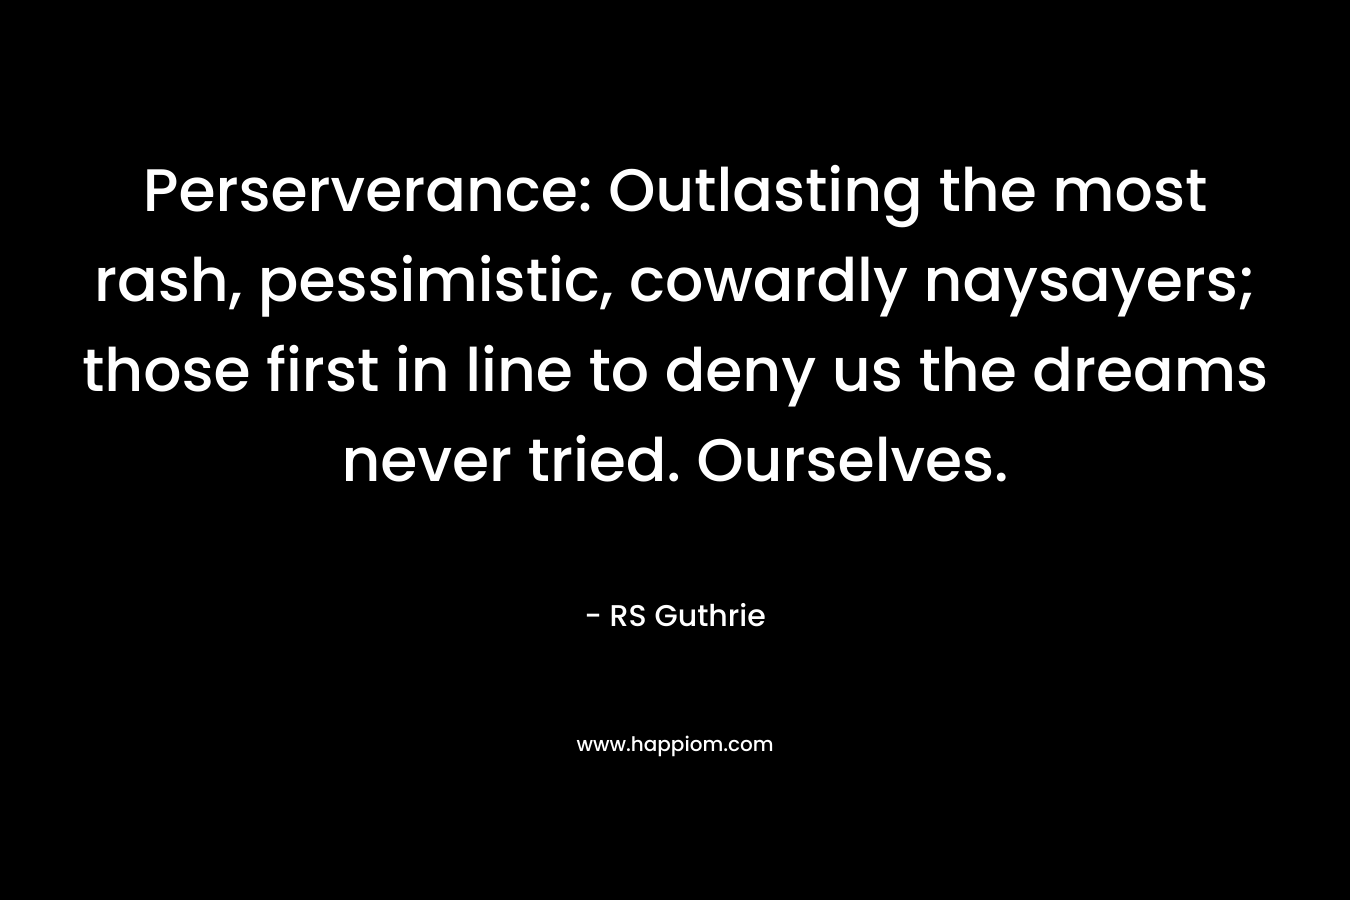 Perserverance: Outlasting the most rash, pessimistic, cowardly naysayers; those first in line to deny us the dreams never tried. Ourselves. – RS Guthrie